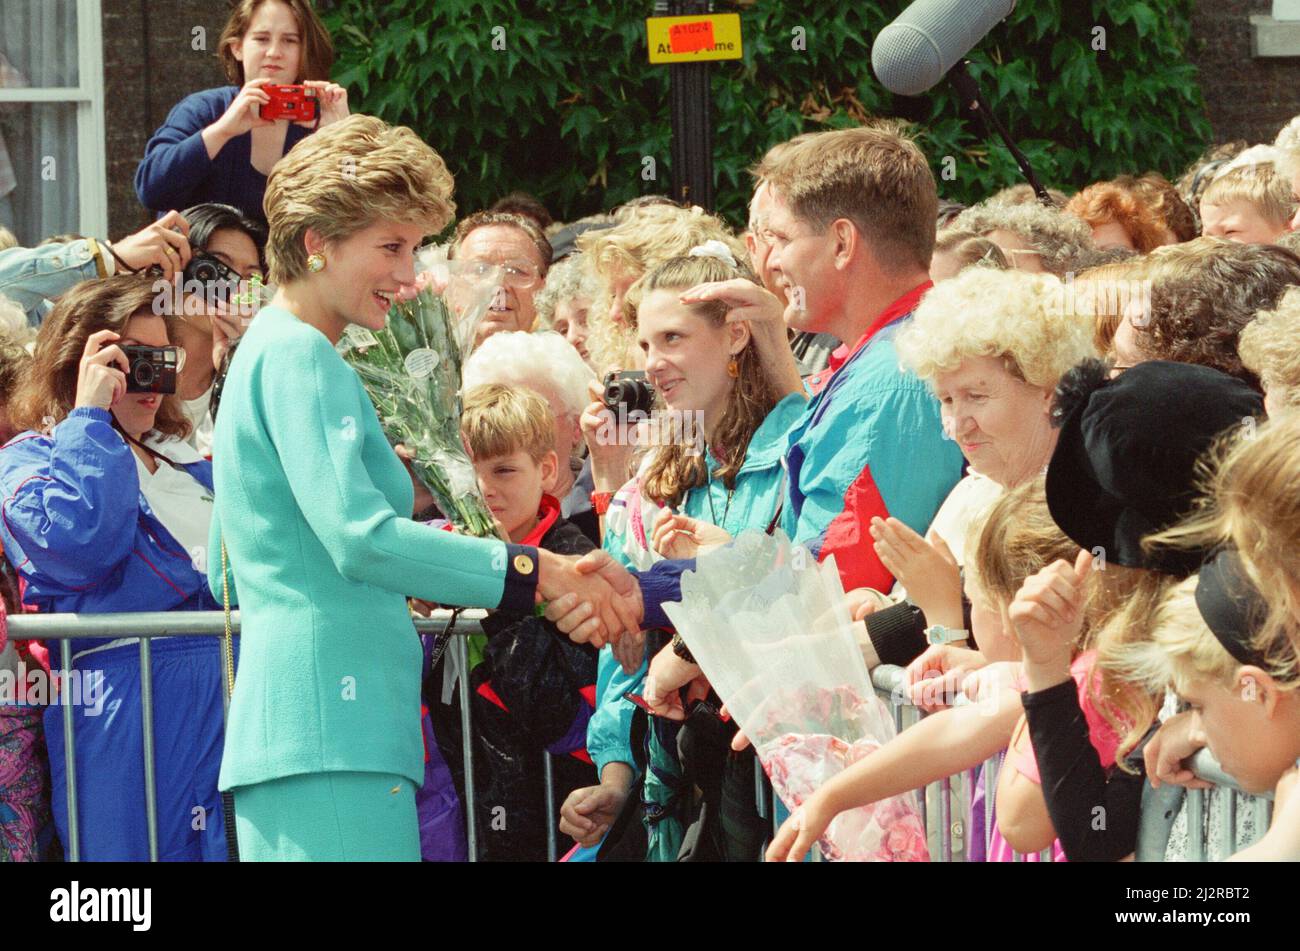 HRH The Princess of Wales, Princess Diana, meets to locals of Bury St Edmunds, Suffolk, on a walkabout after she'd spent time visiting patients at St Nicholas hospice.Whilst at the hospice she spoke with patient Josephine Brown (68) and explained how she would not pressure her sons William and Harry into doing royal duties too young.  Picture taken 27th July 1993 Stock Photo